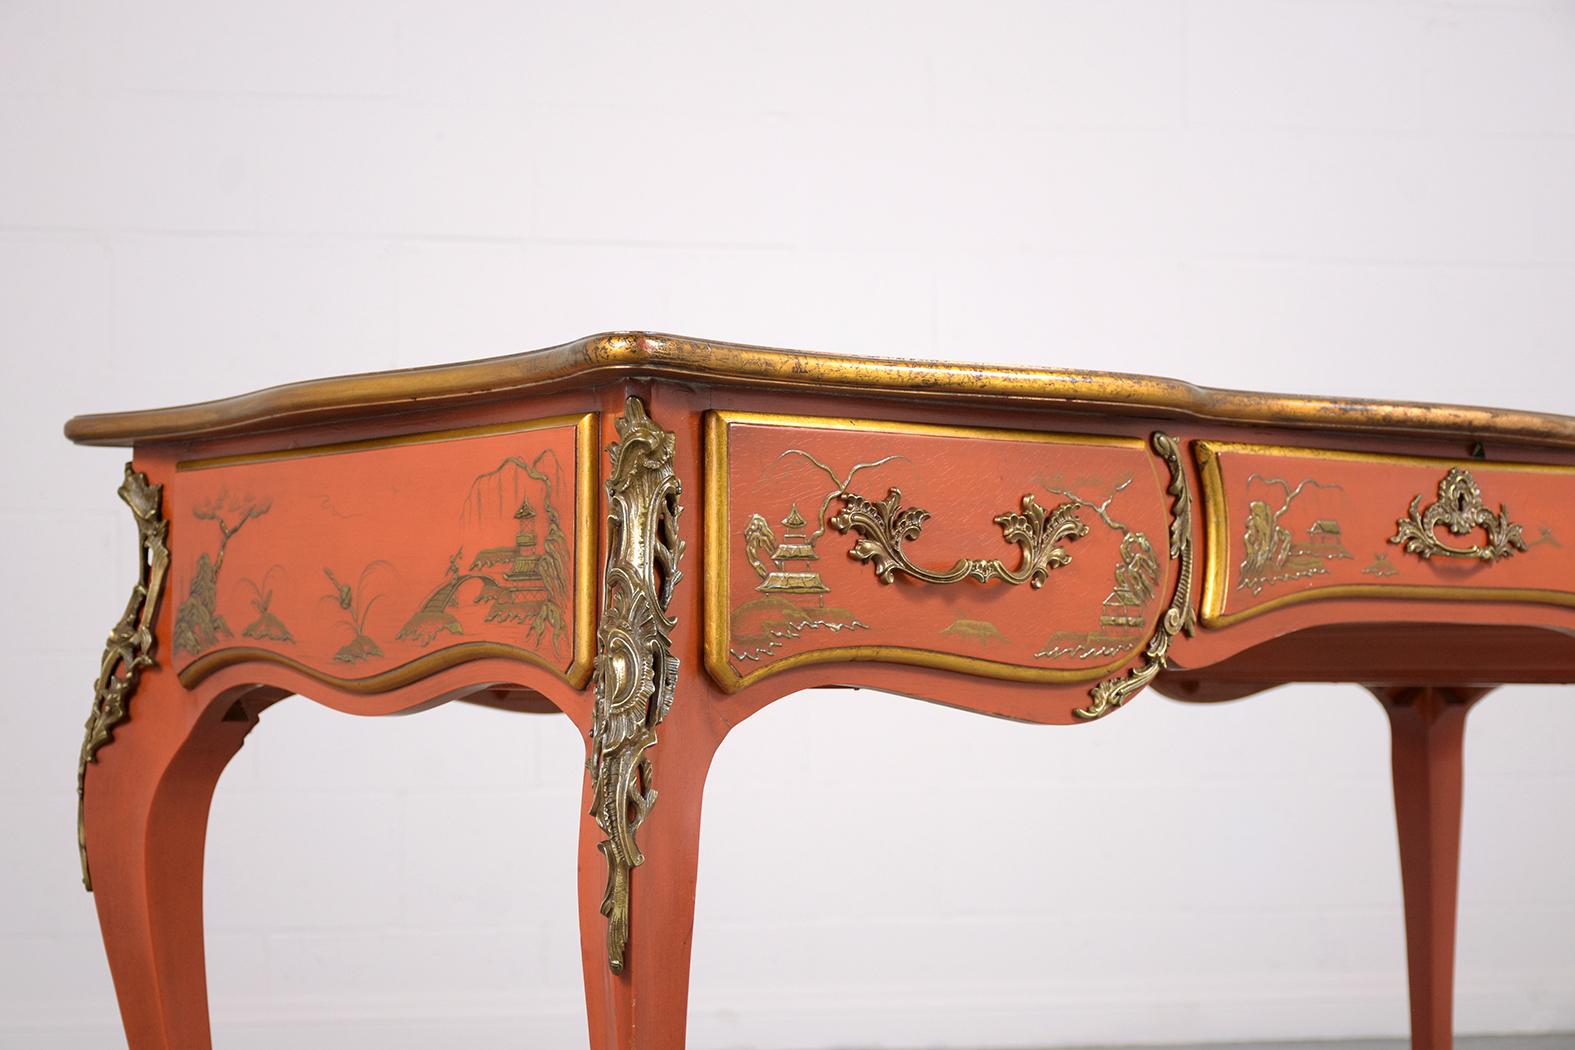 1970s Chinoiserie-Style Walnut Desk with Engraved Leather Top & Brass Accents For Sale 1